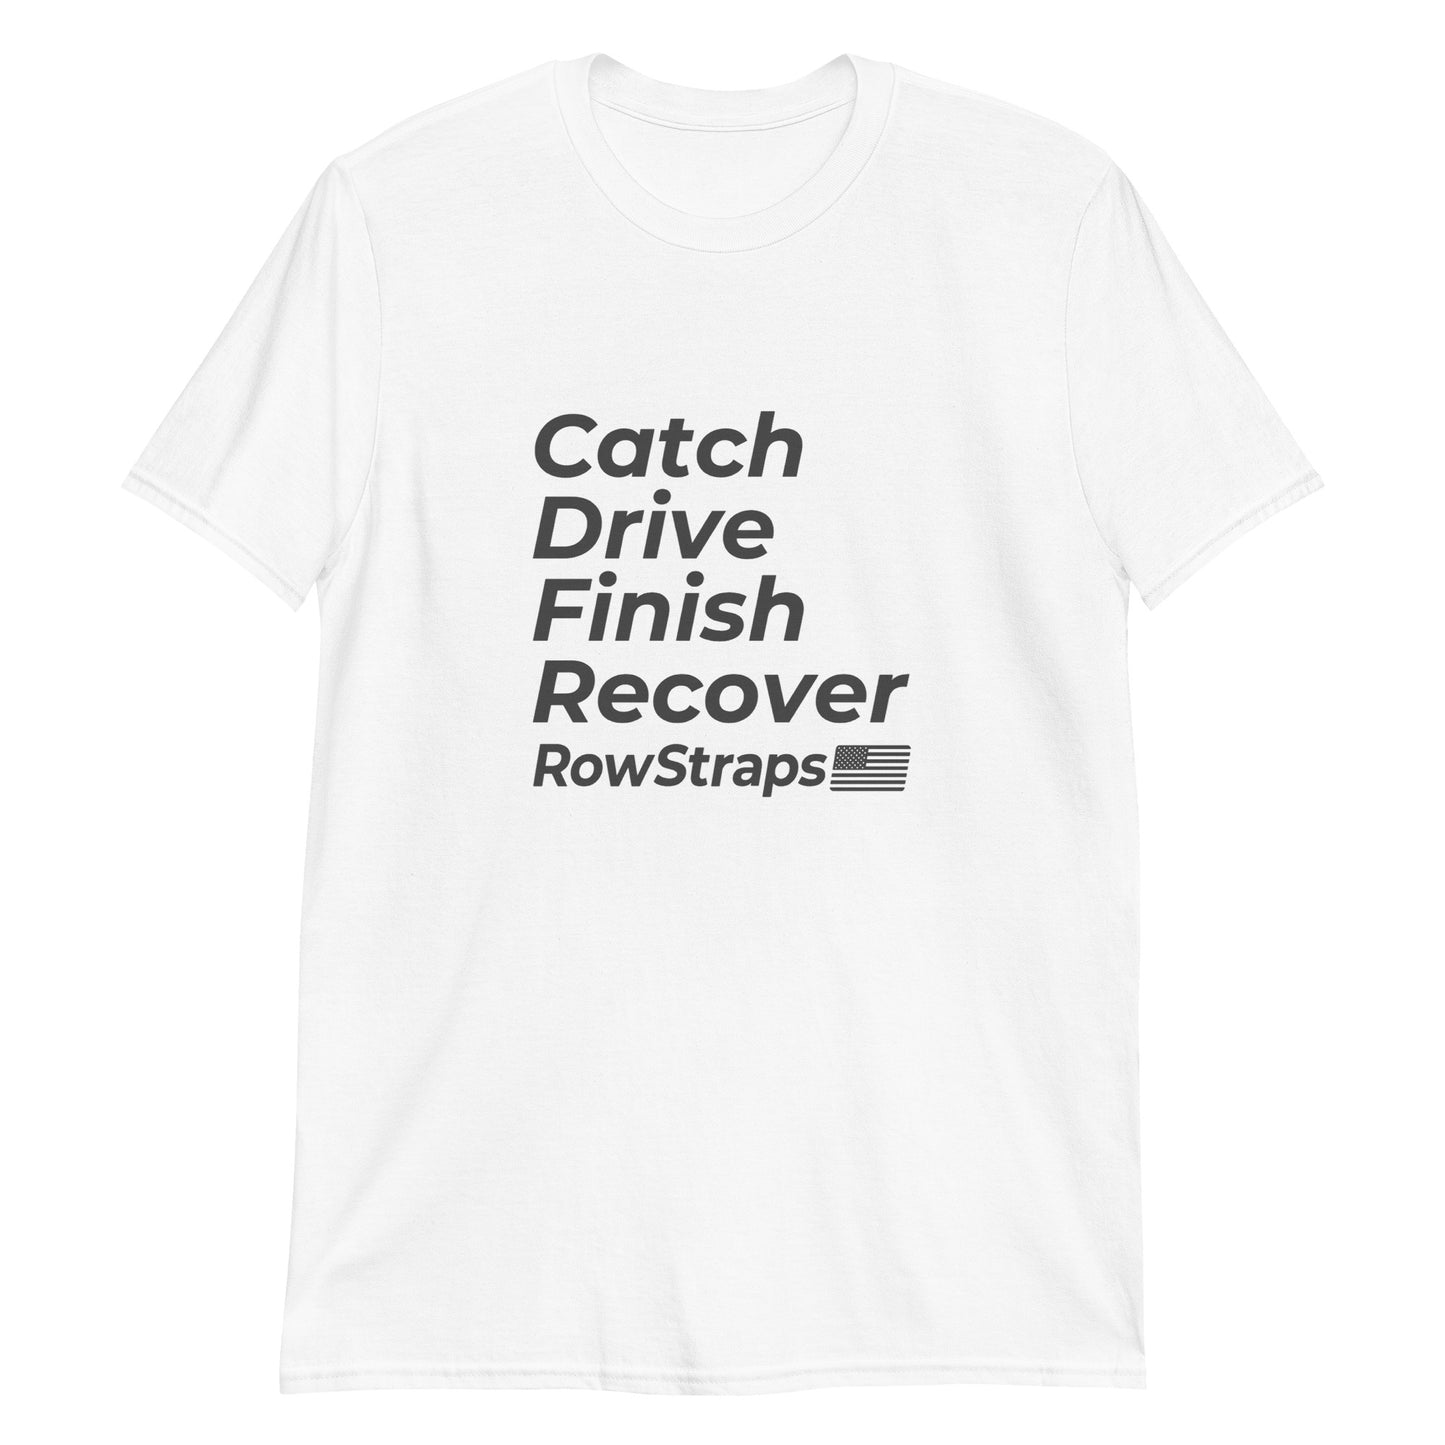 Catch Drive Finish Recover T-Shirt